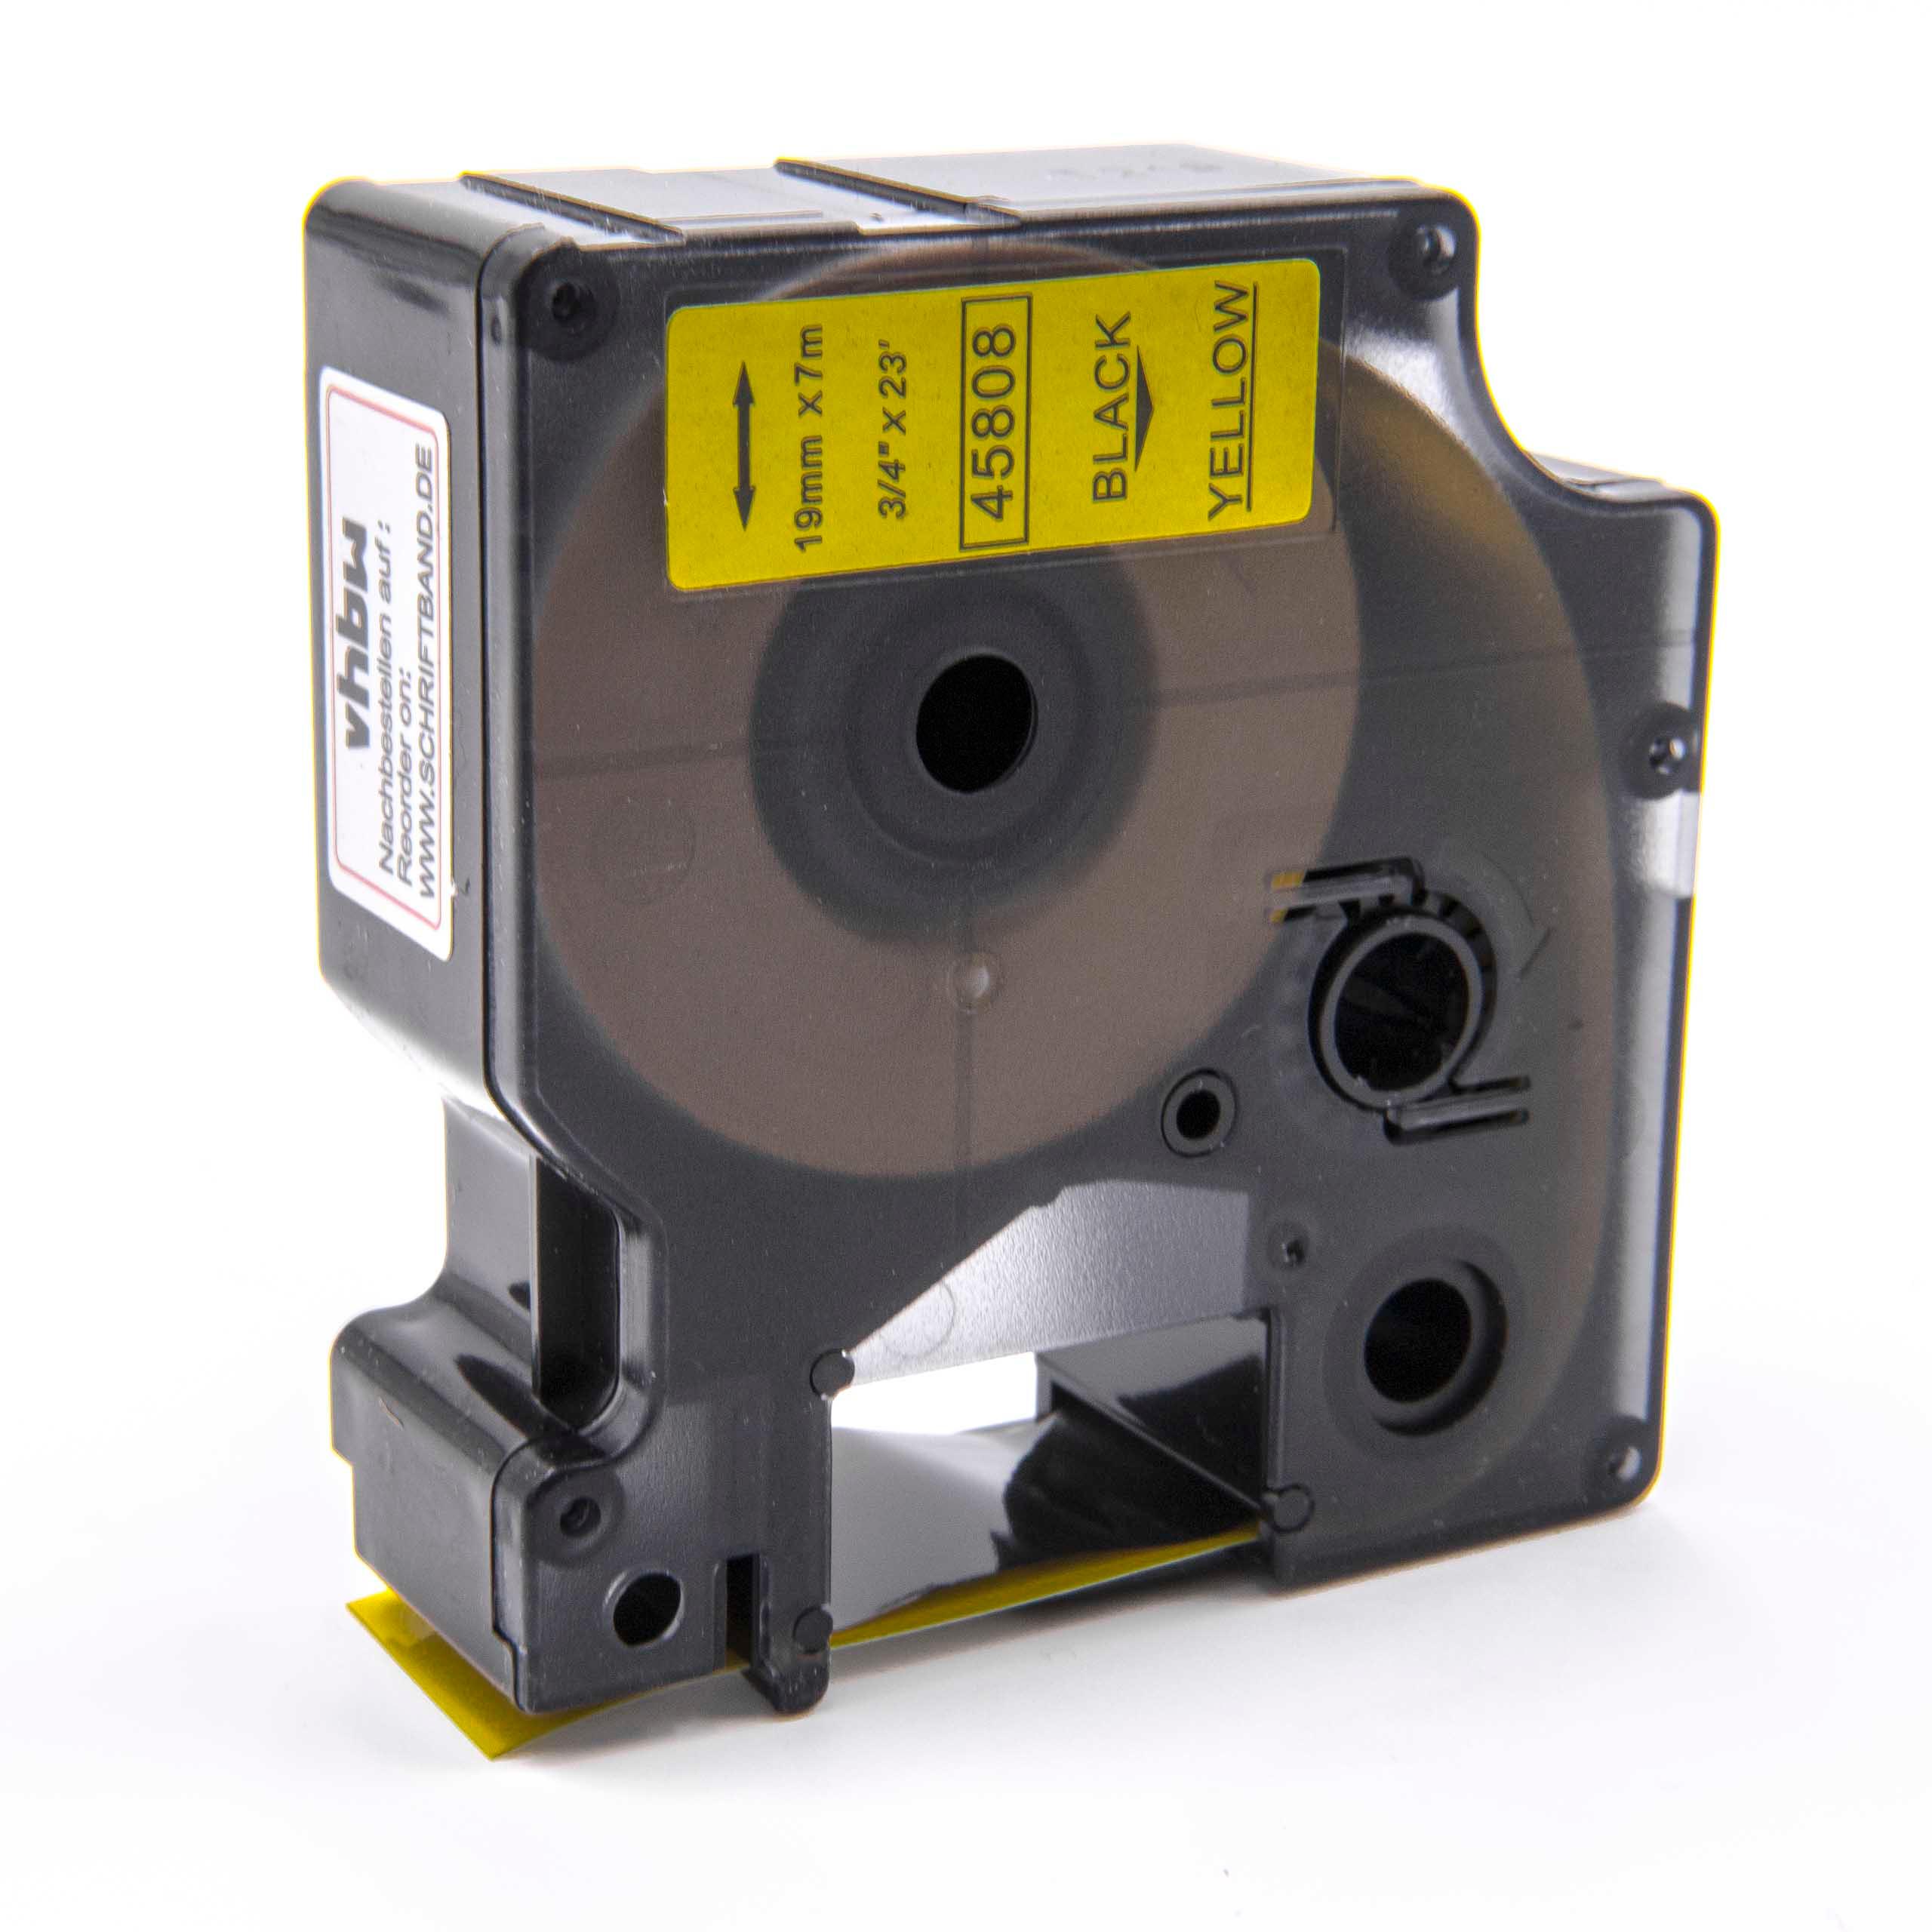 Label Tape as Replacement for Dymo D1, 45808 - 19 mm Black to Yellow